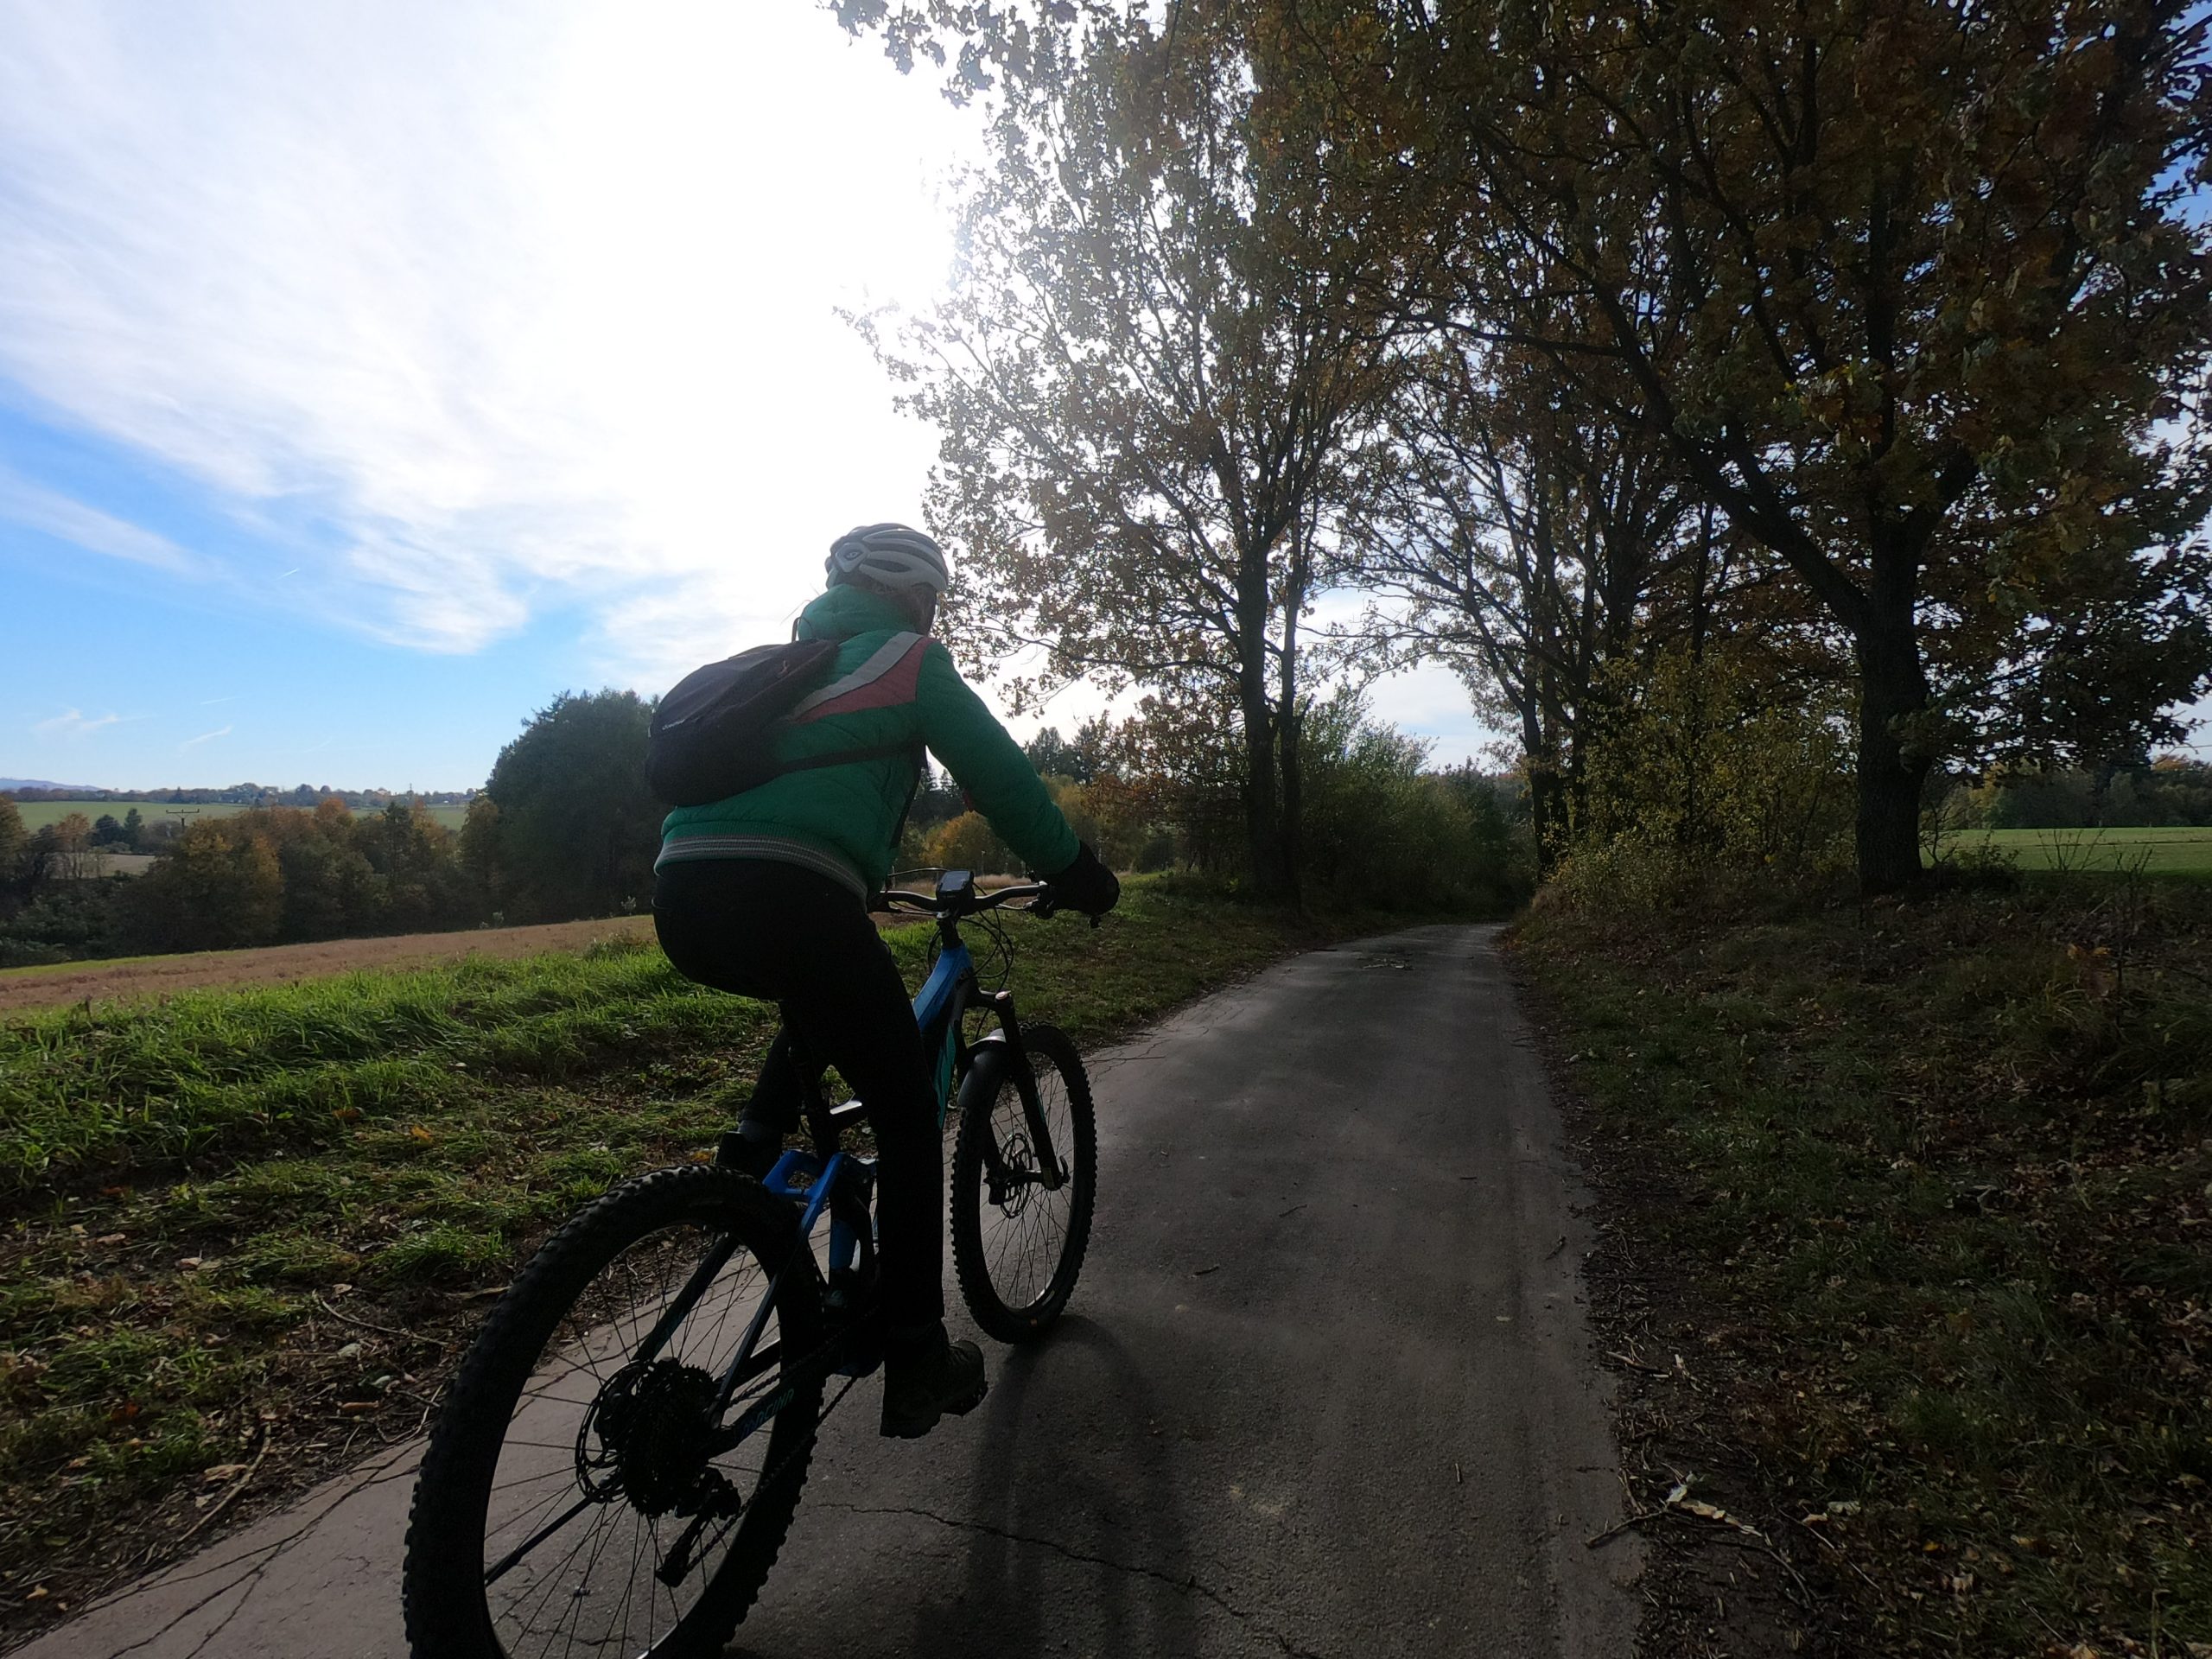 Bohemian Paradise cycling holiday – self guided in your own pace